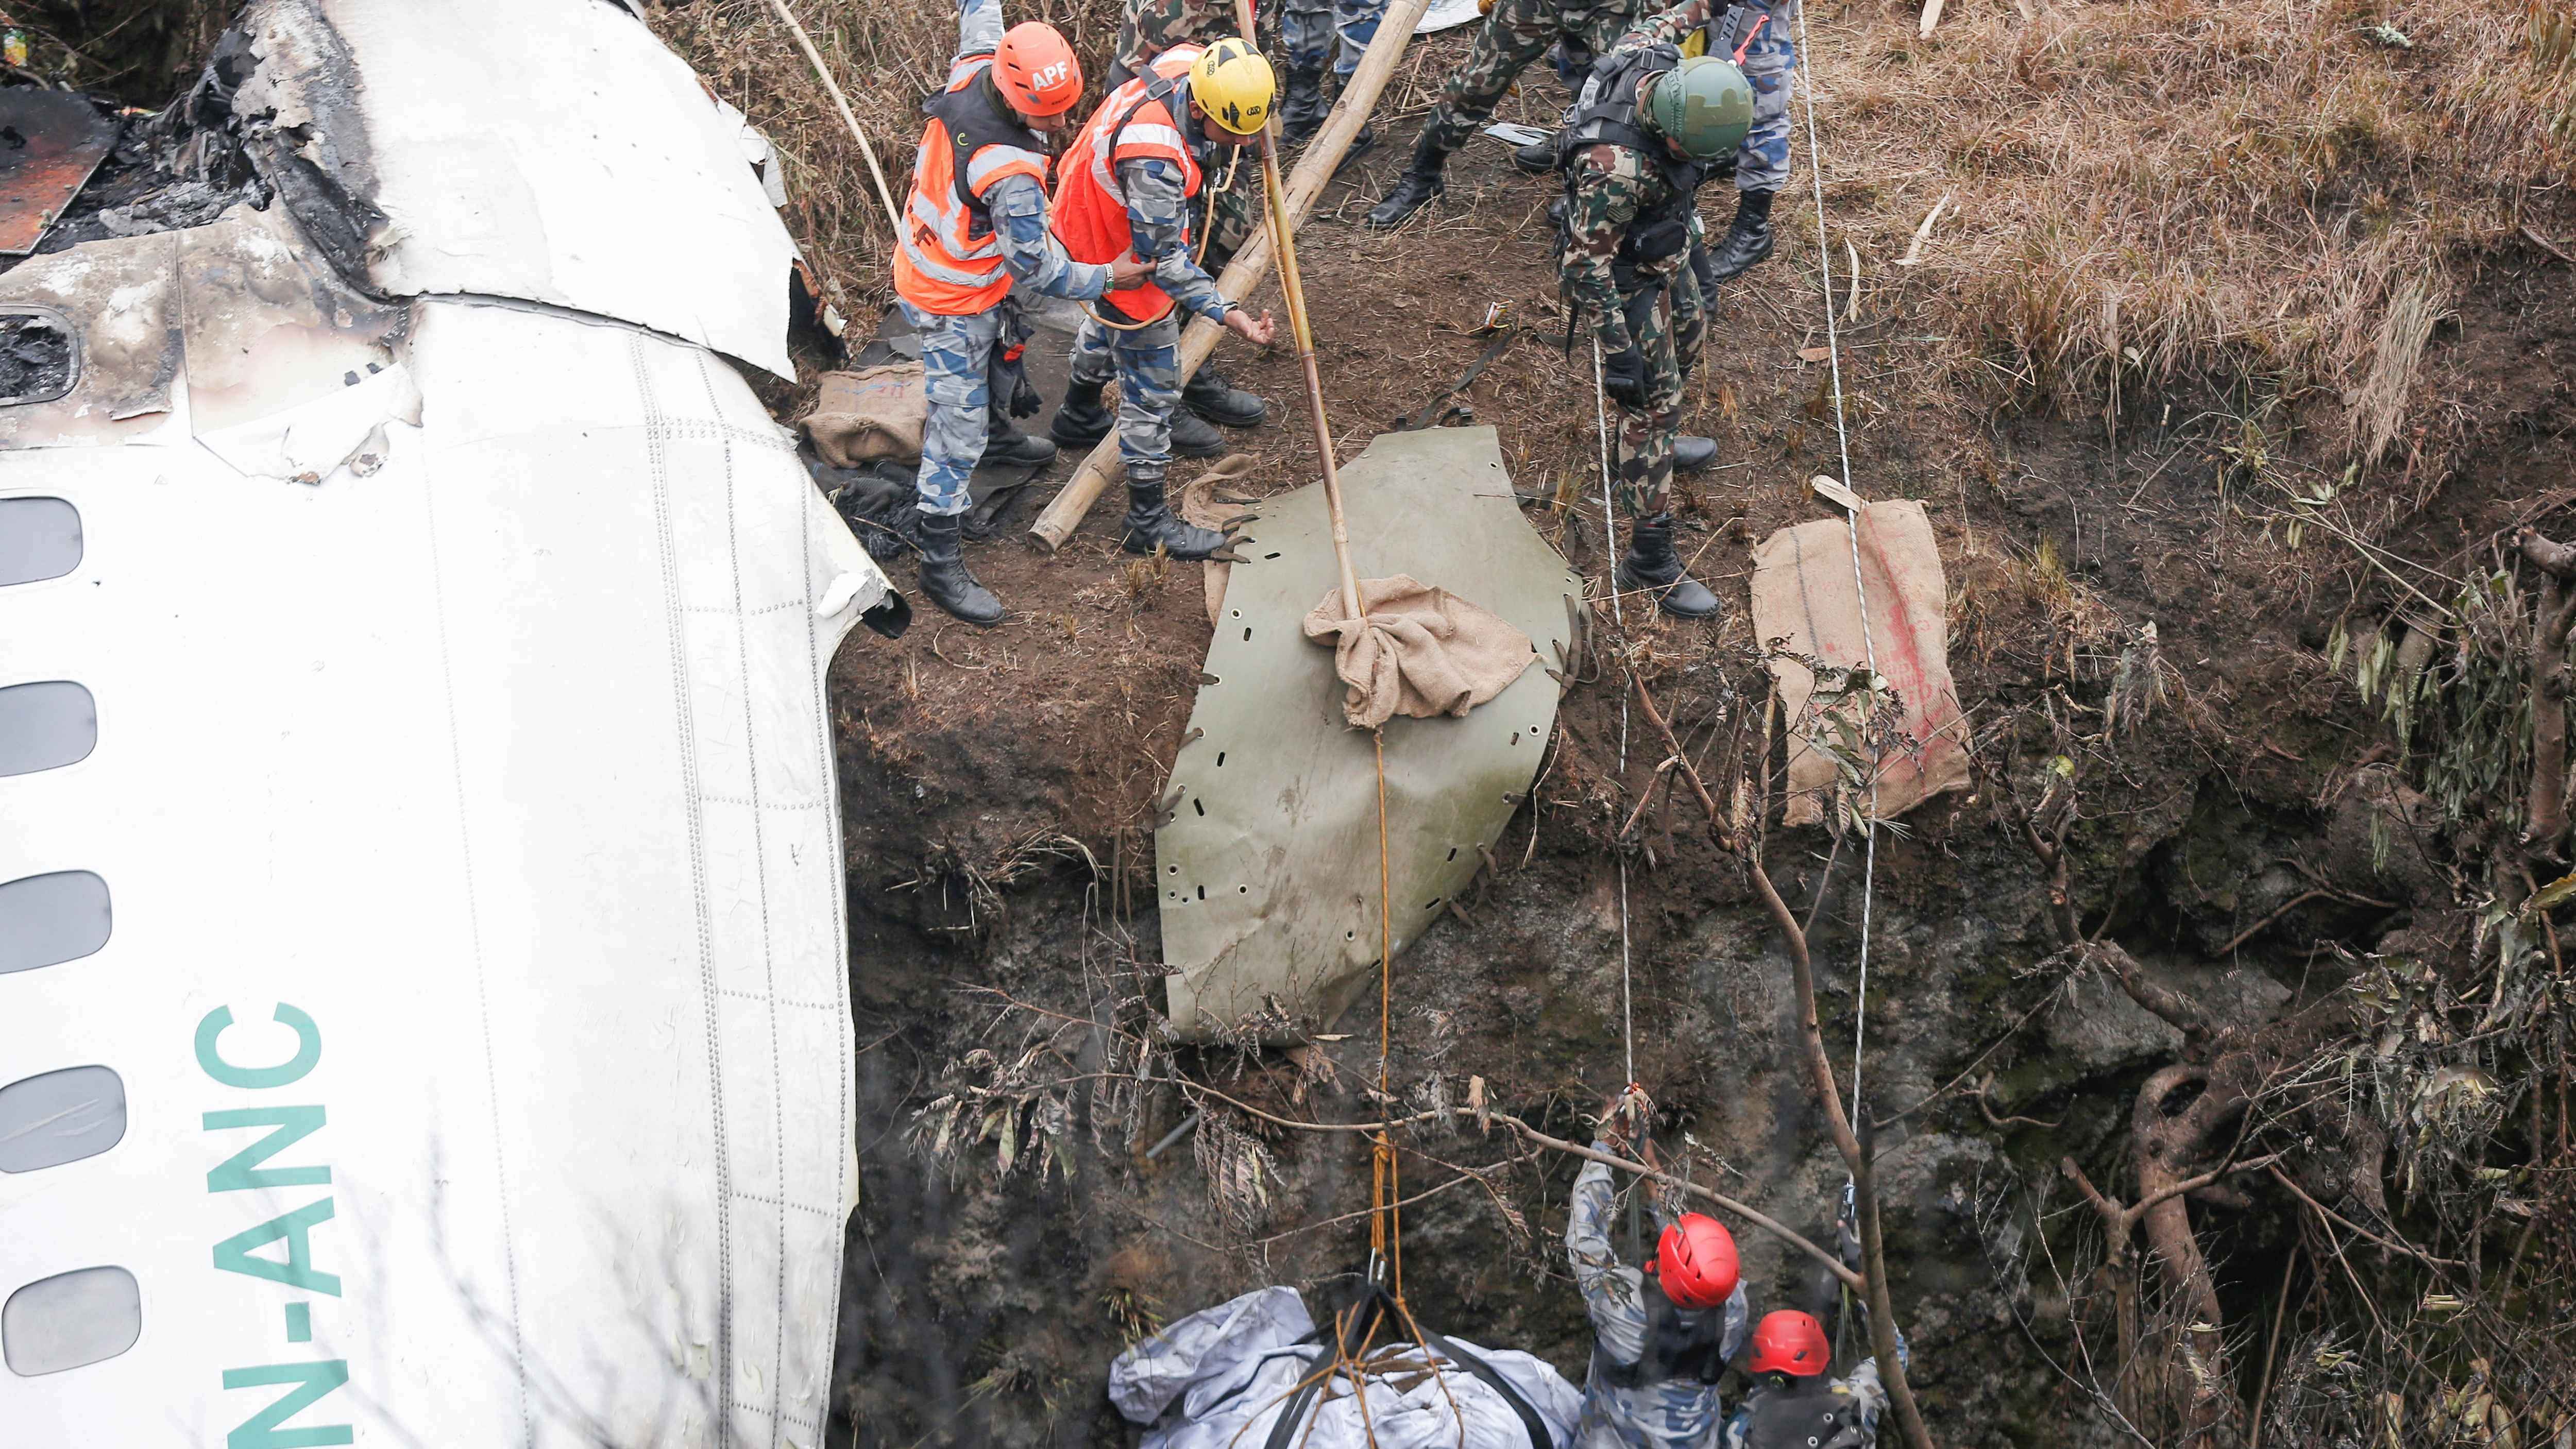 A rescue team recovers the body of a victim from the site of the plane crash. Credit: Reuters Photo